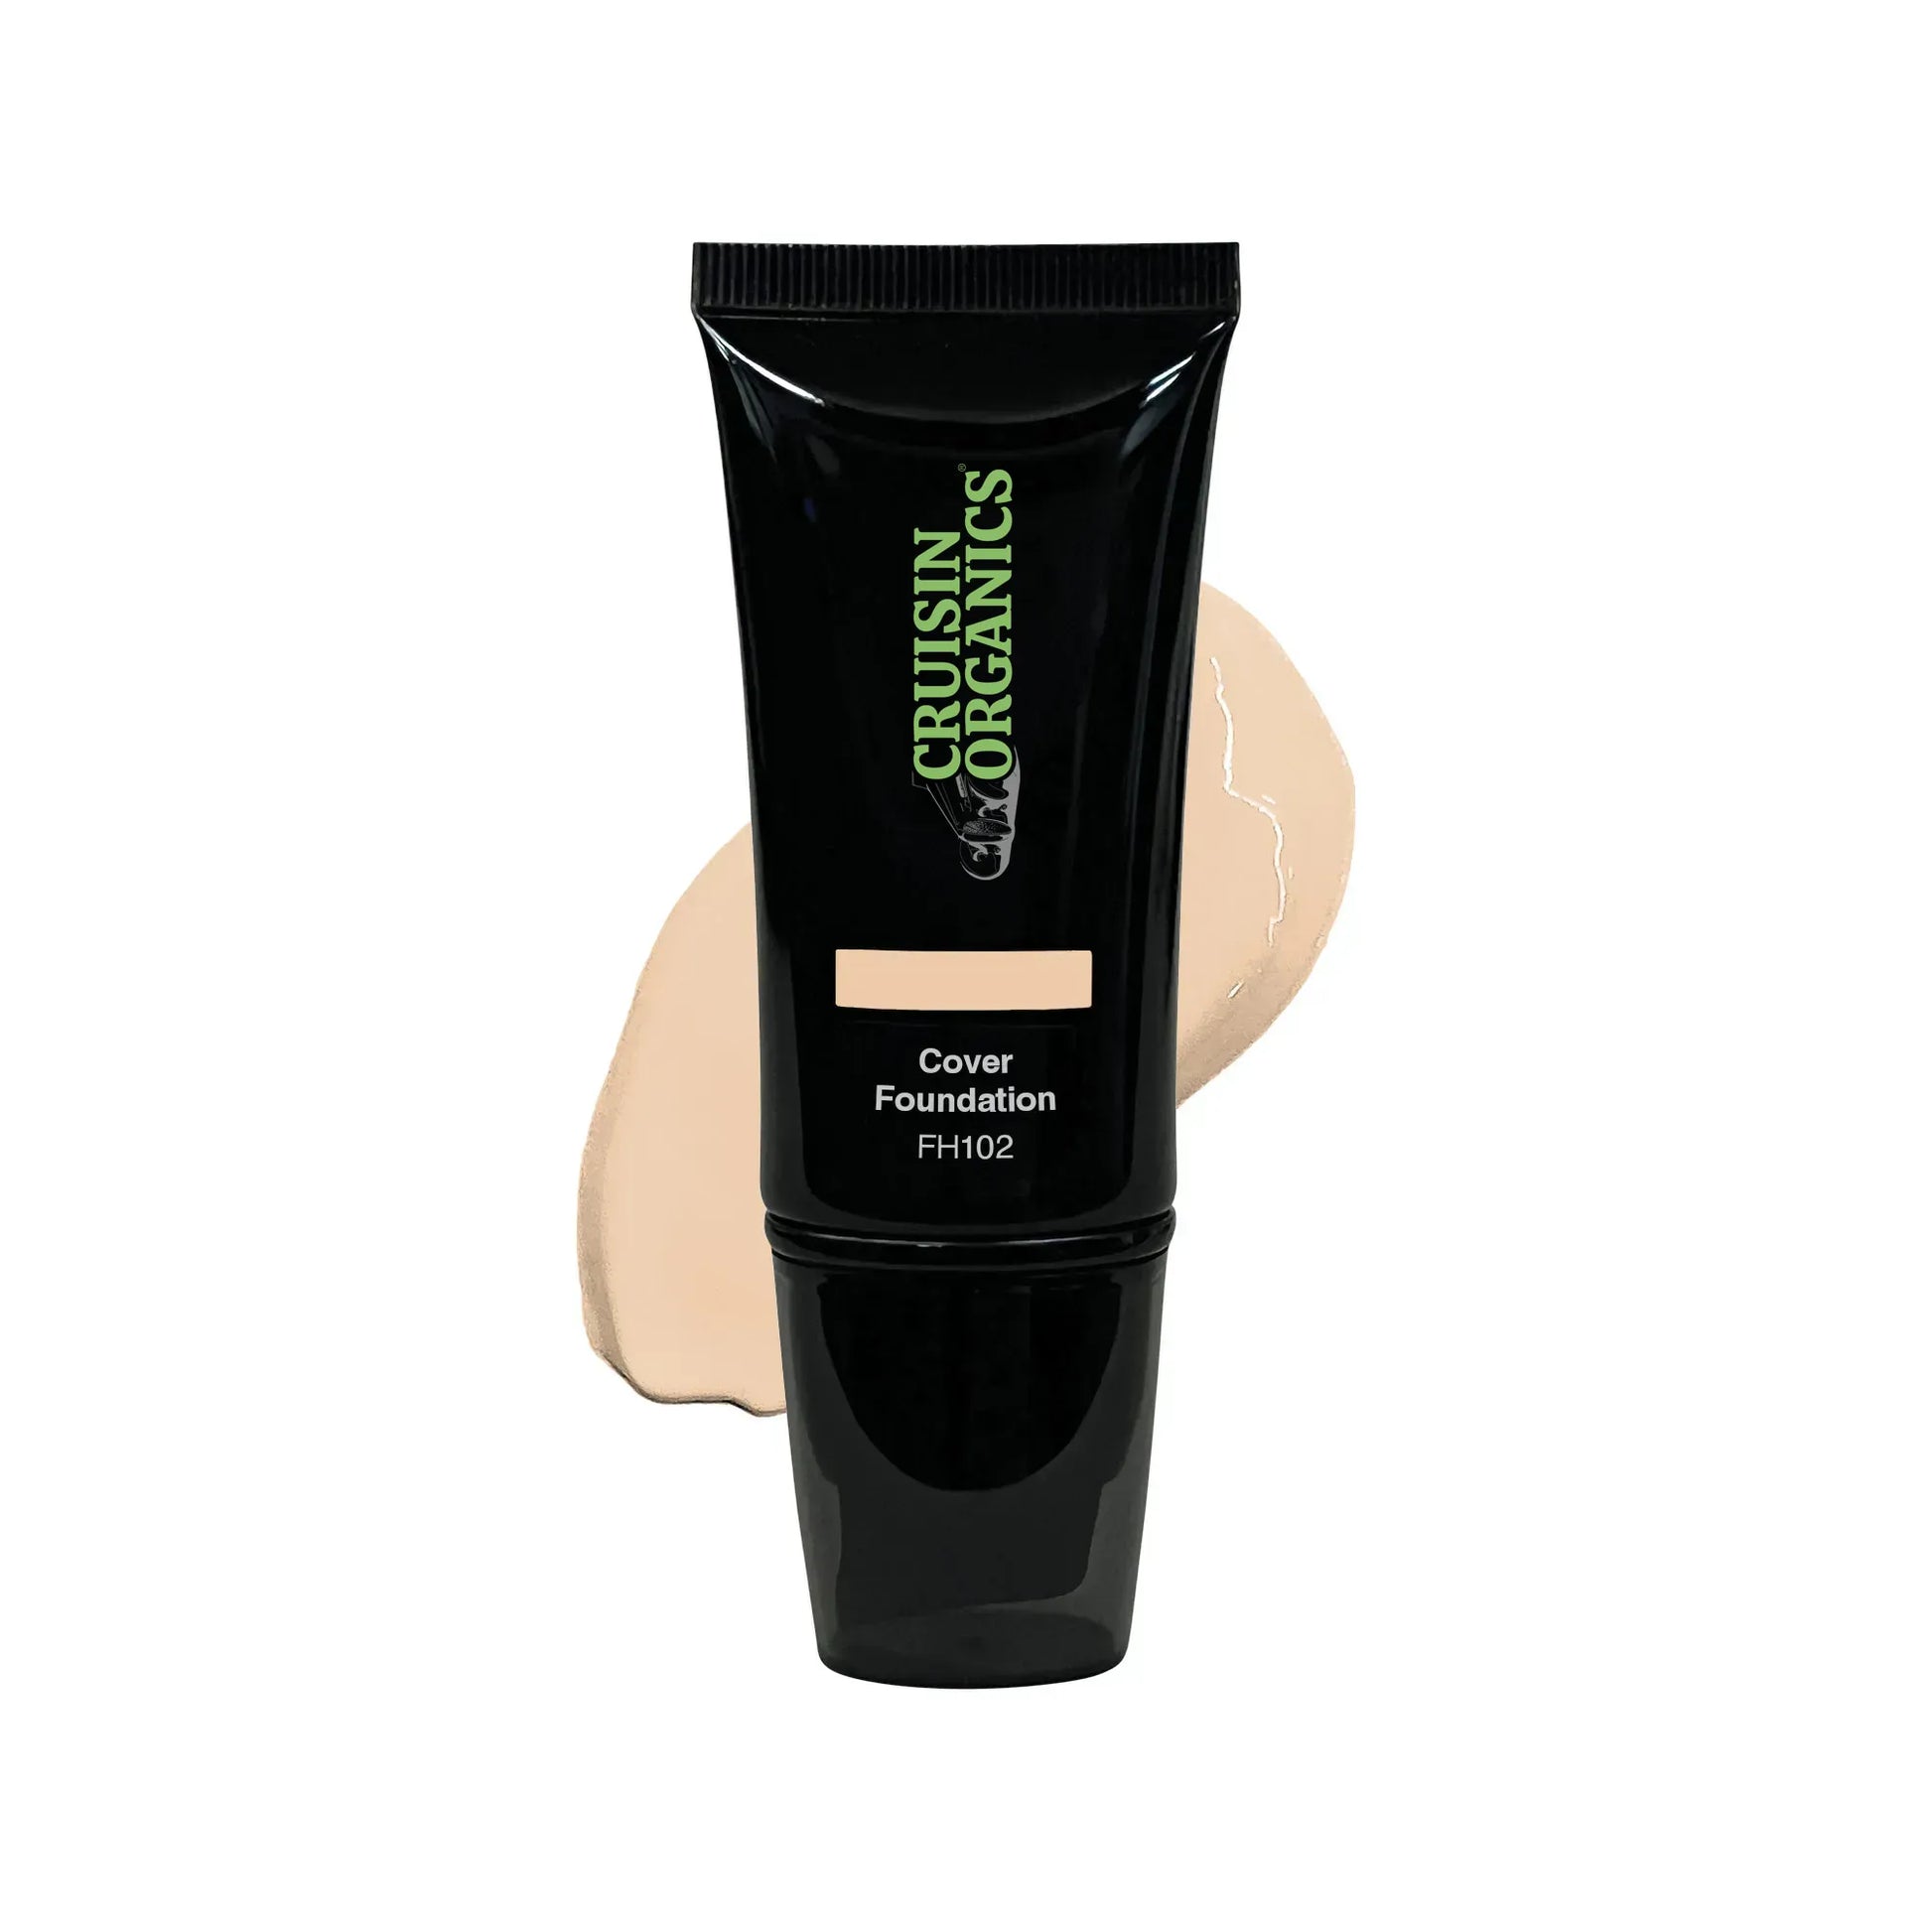 Silk Foundation by Cruisin Organics is free of parabens, making it a safe and natural choice for your makeup routine.